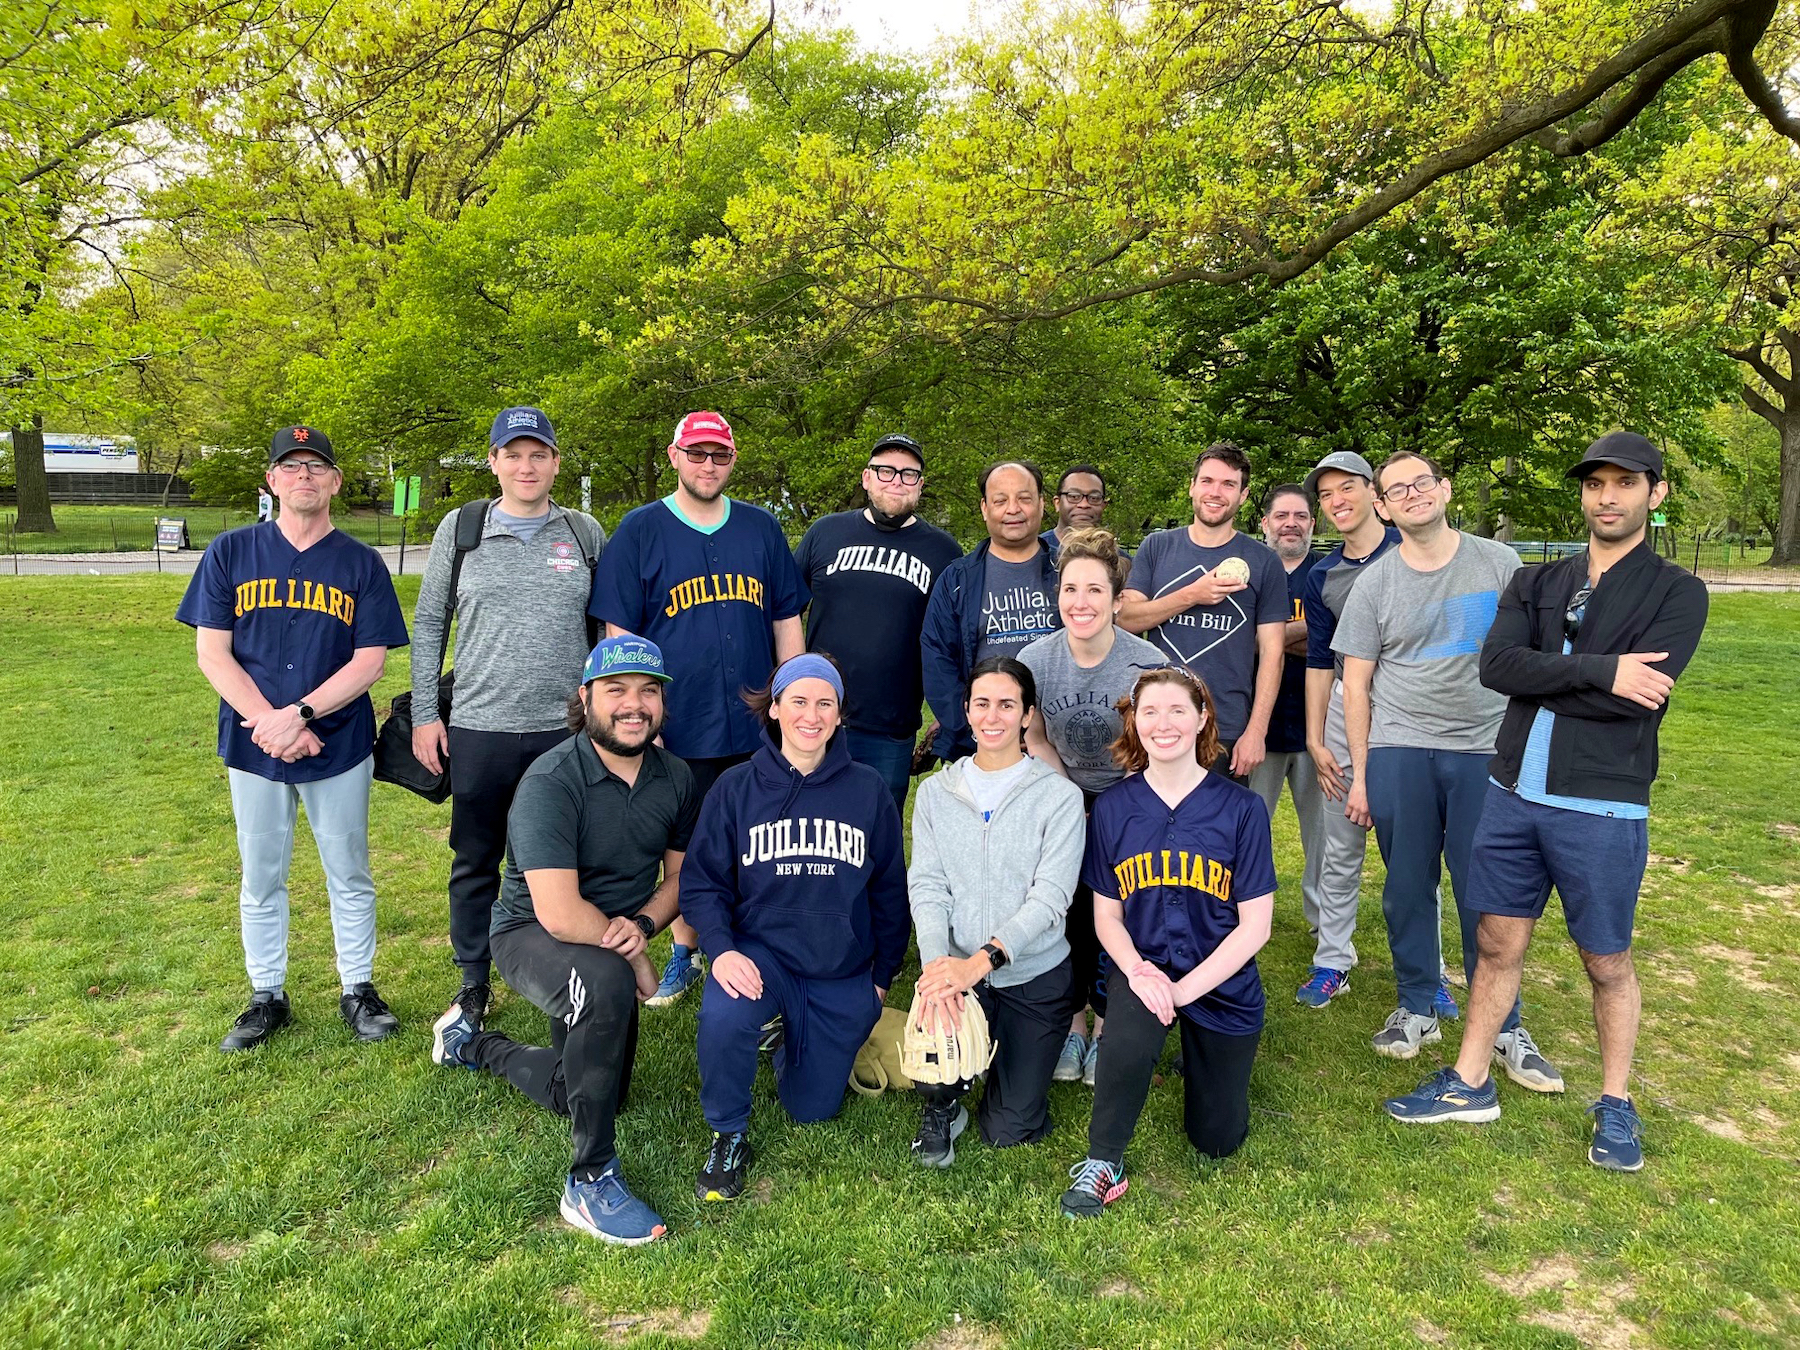 The Juilliard softball team, dressed in their athletic attire, poses in the park, smiling and a sense of camaraderie is present